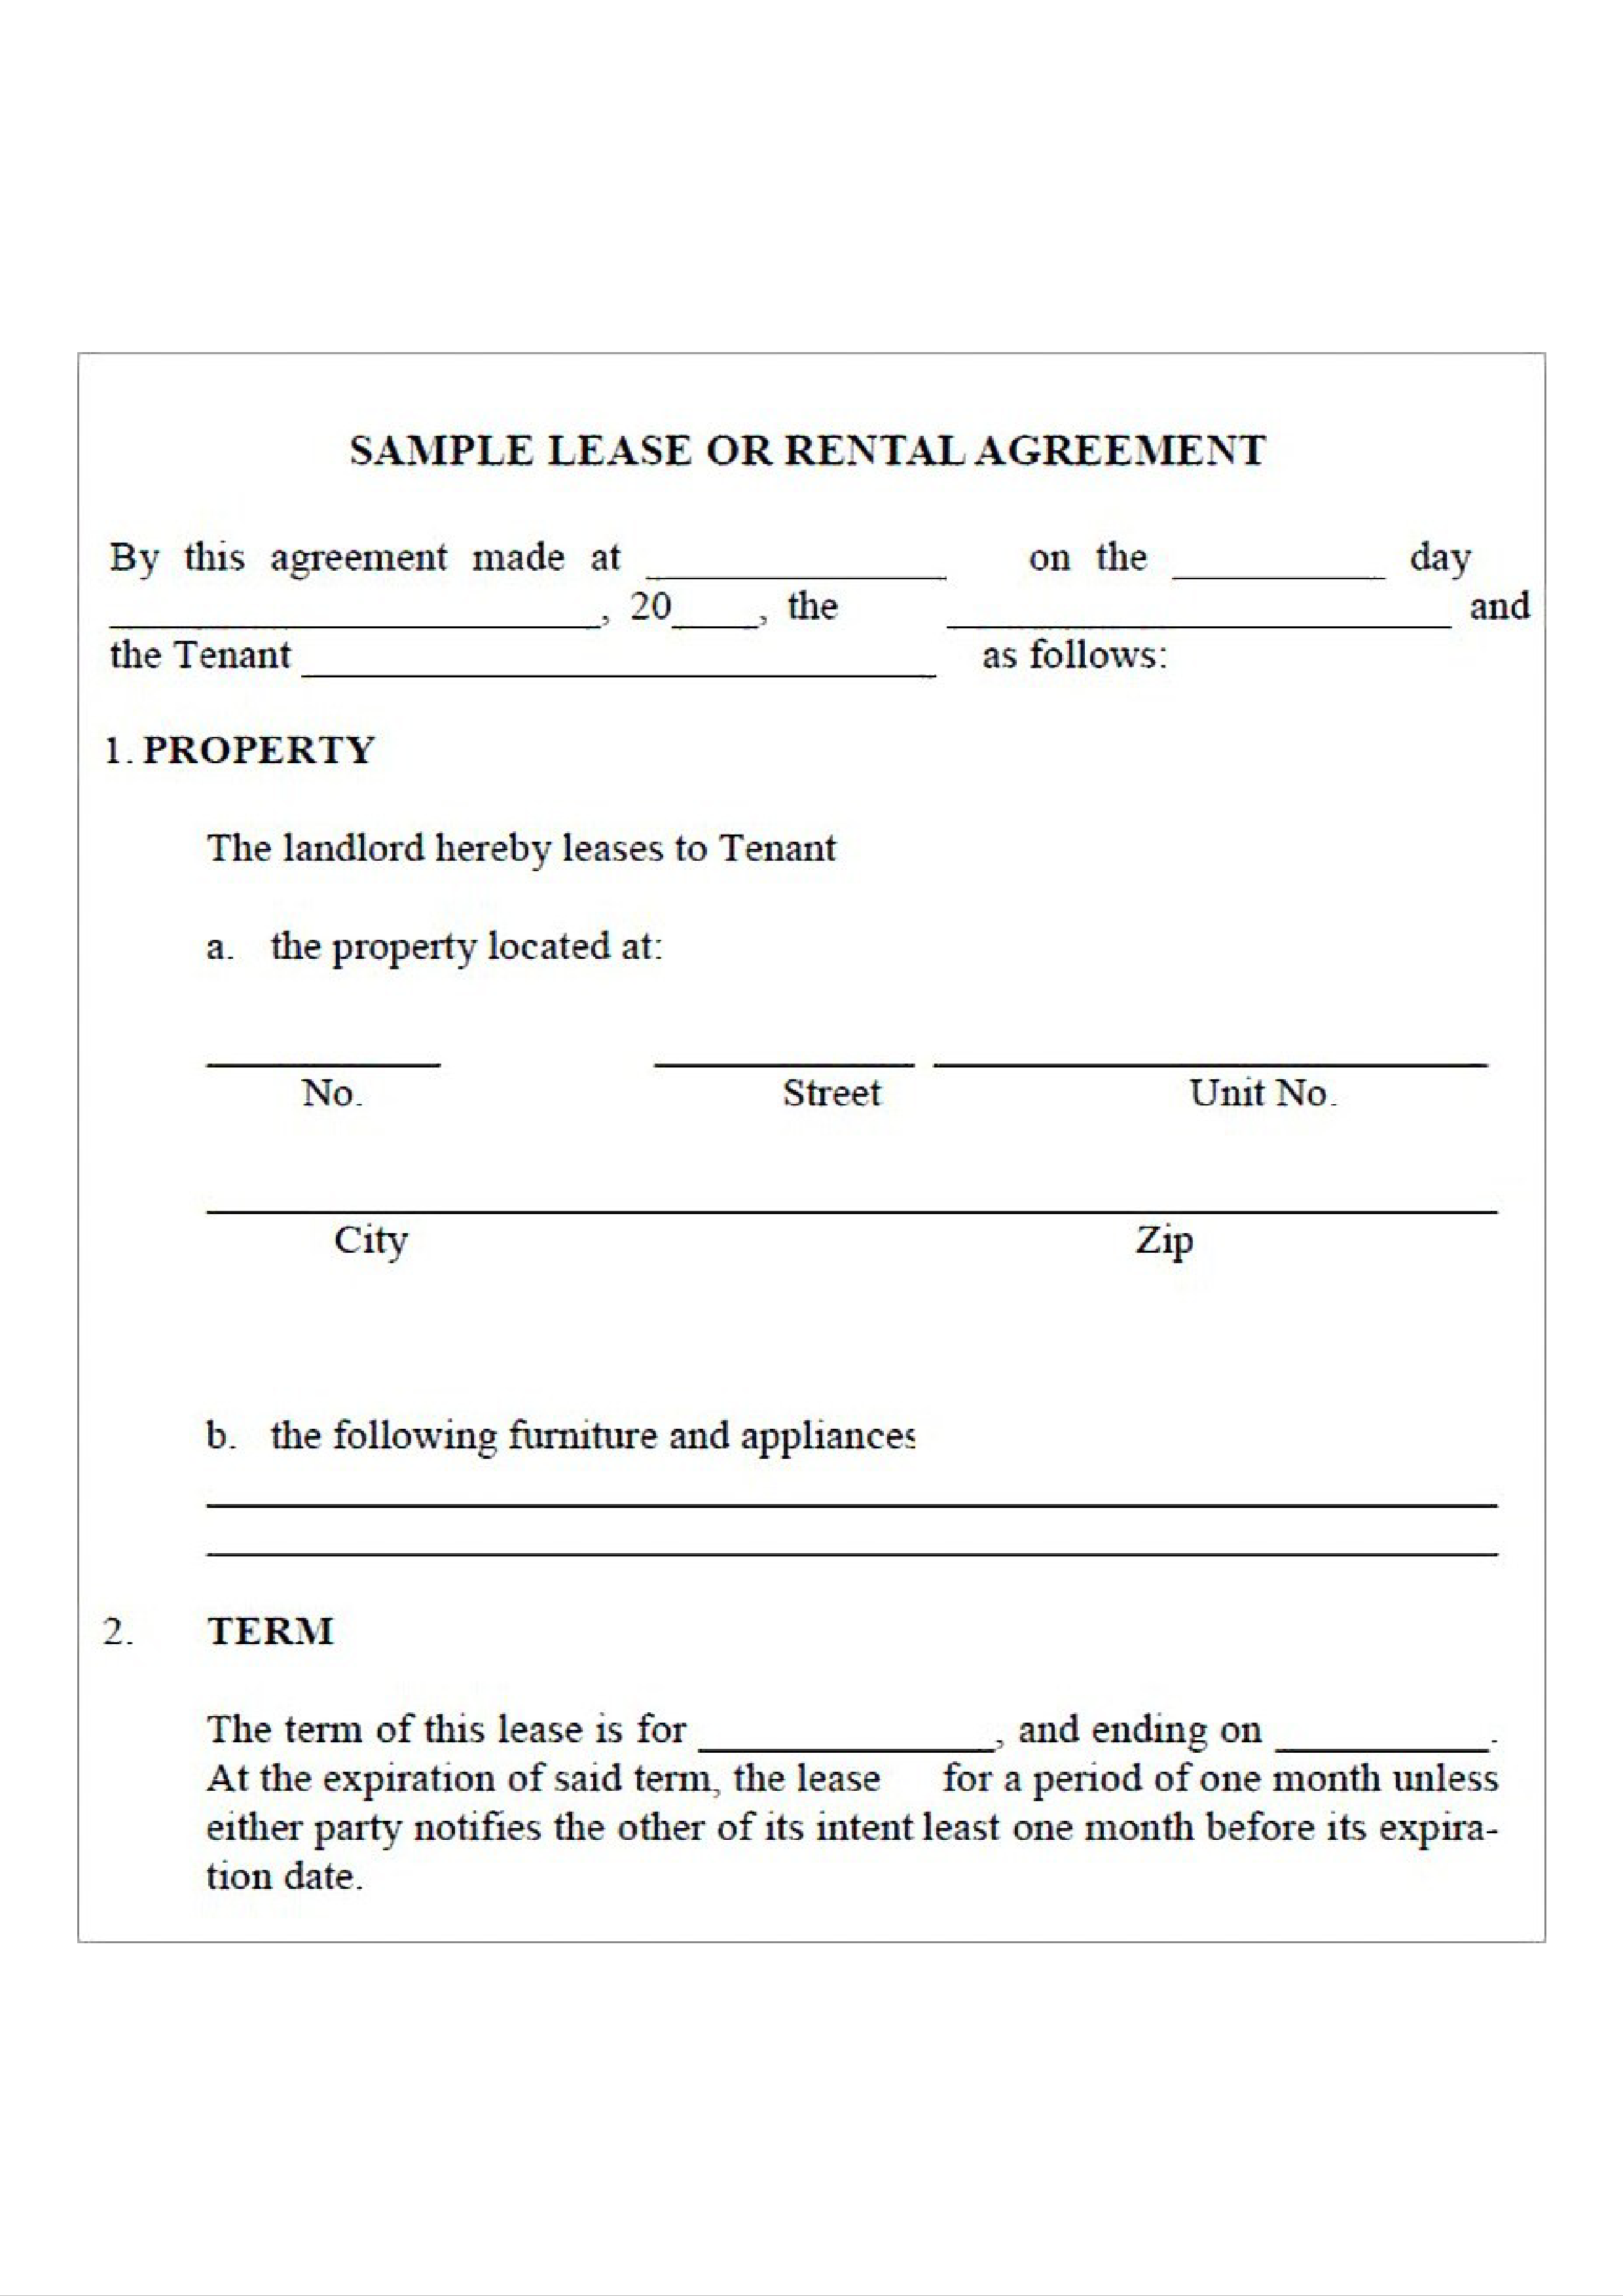 rental-agreement-for-business-lease-templates-at-allbusinesstemplates